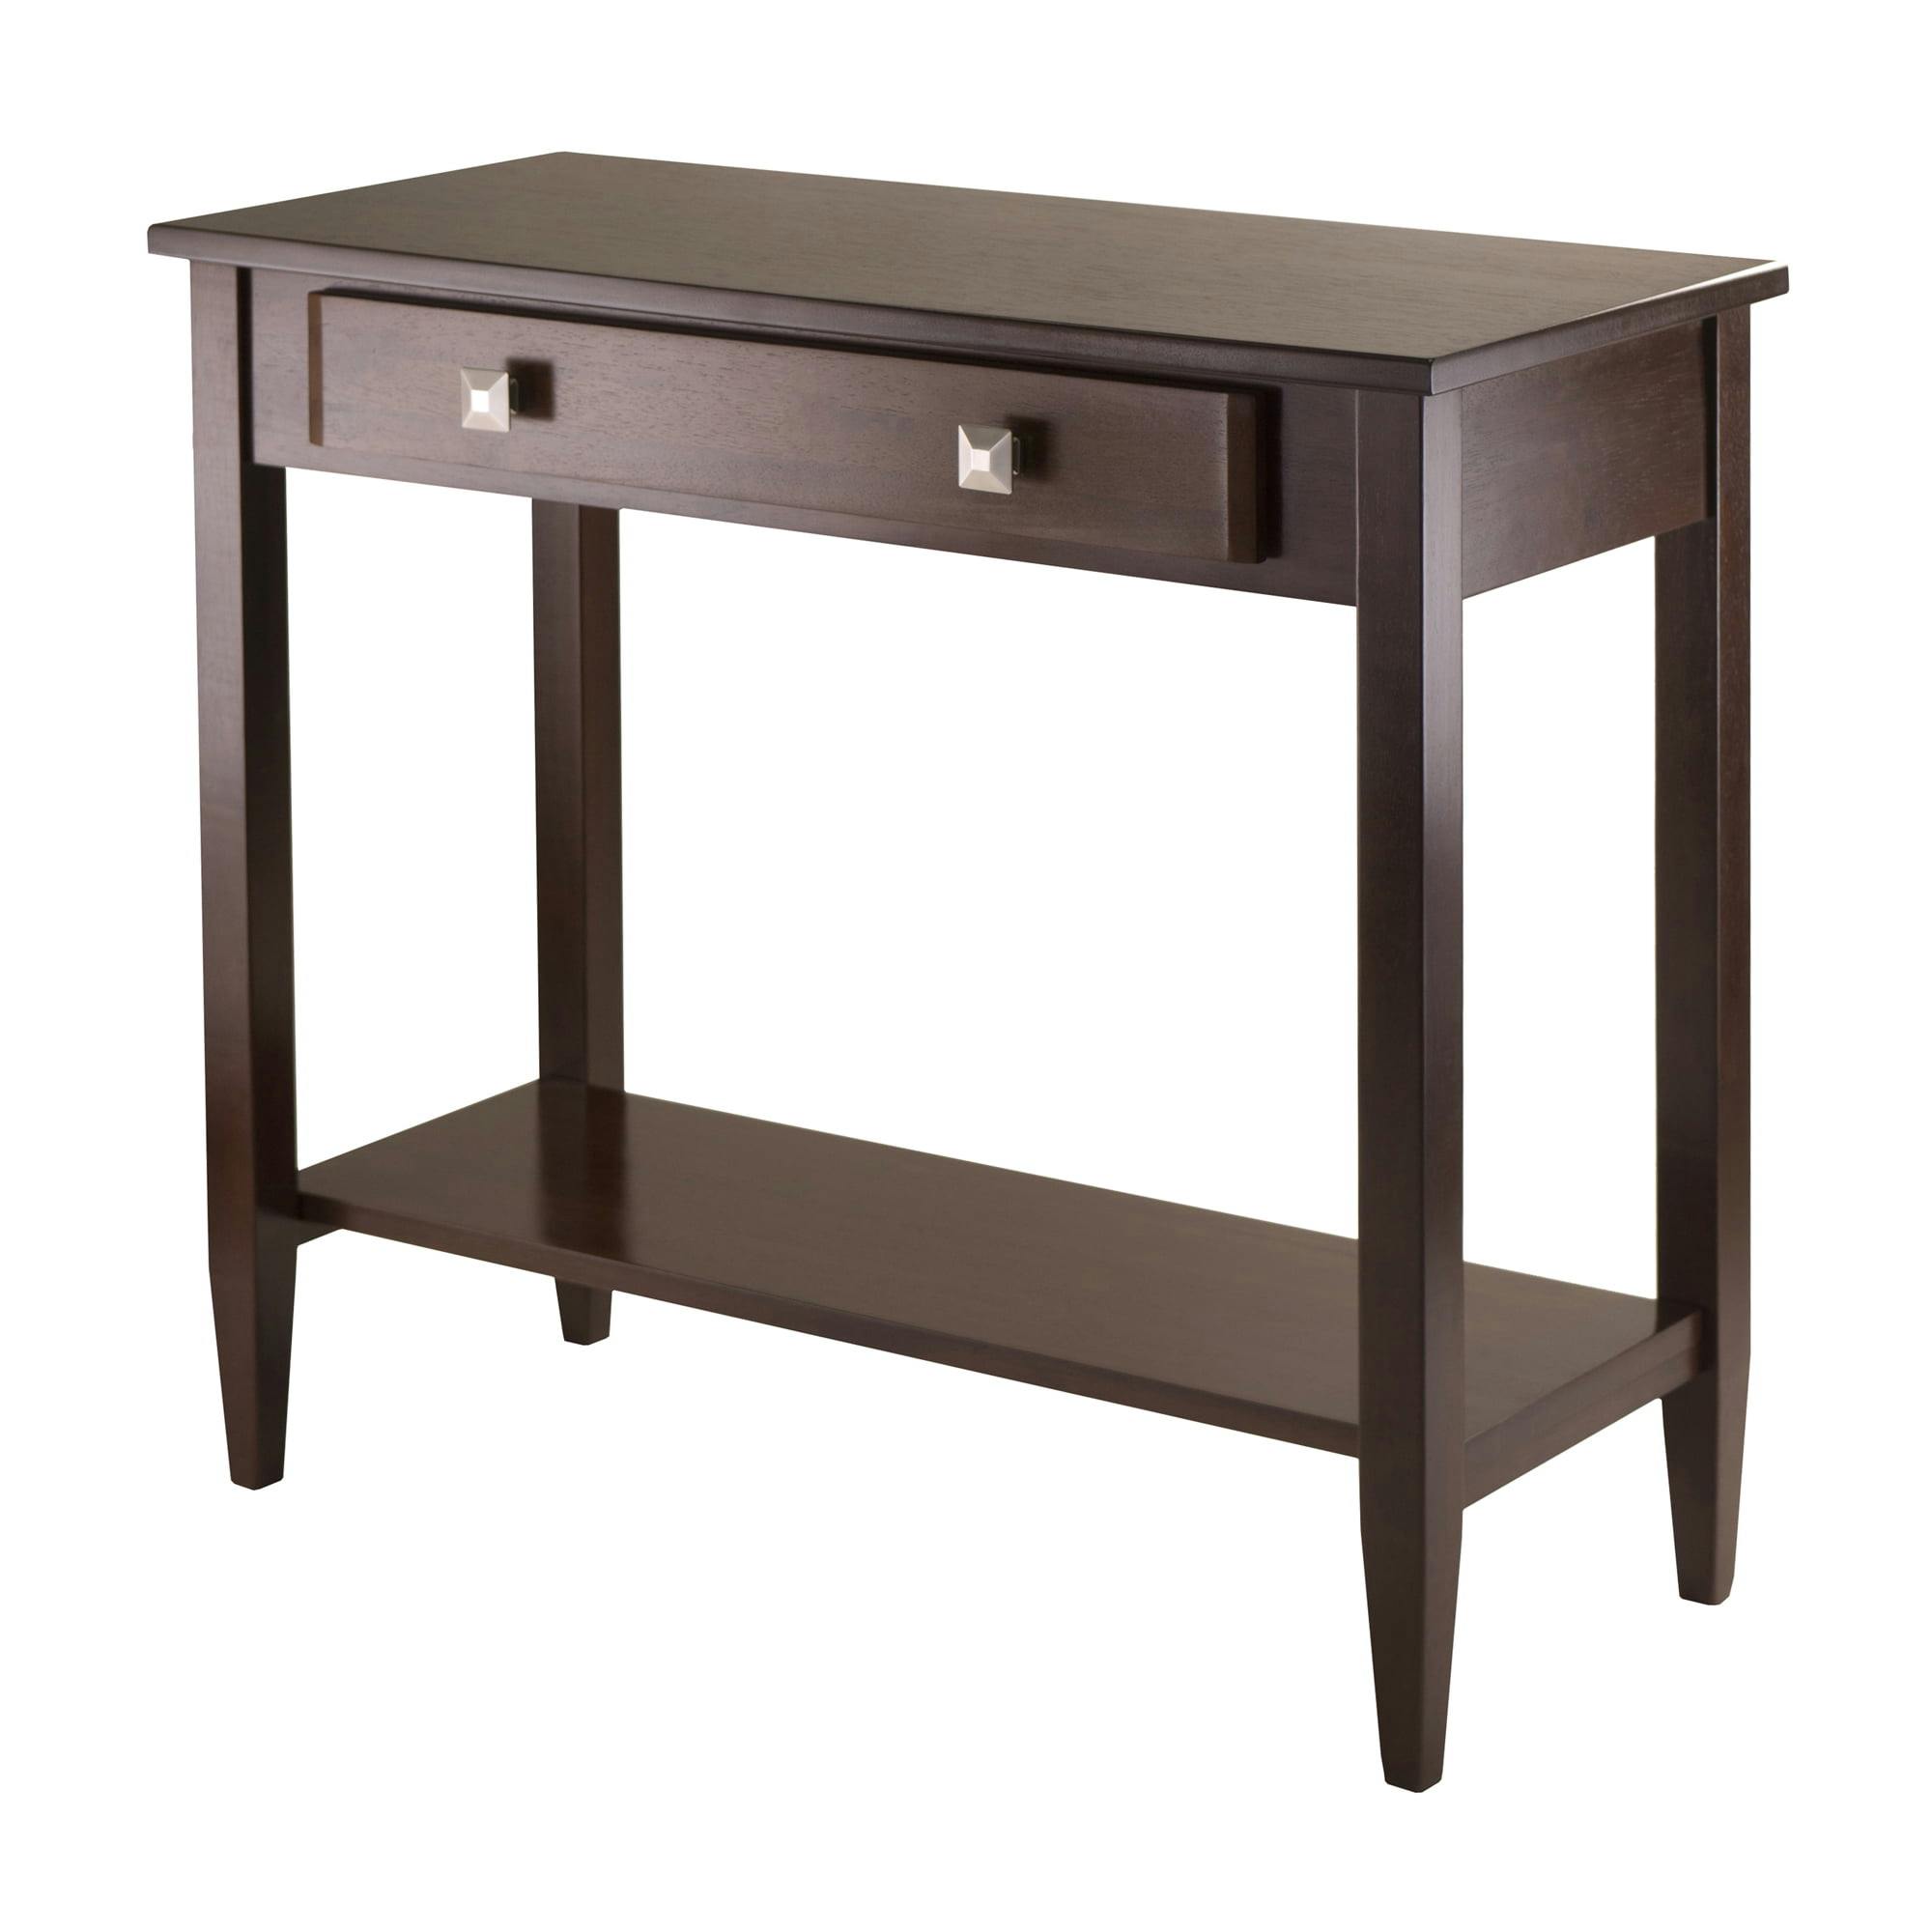 Winsome Richmond Mid-Century Modern Walnut Wood Console Table with Storage